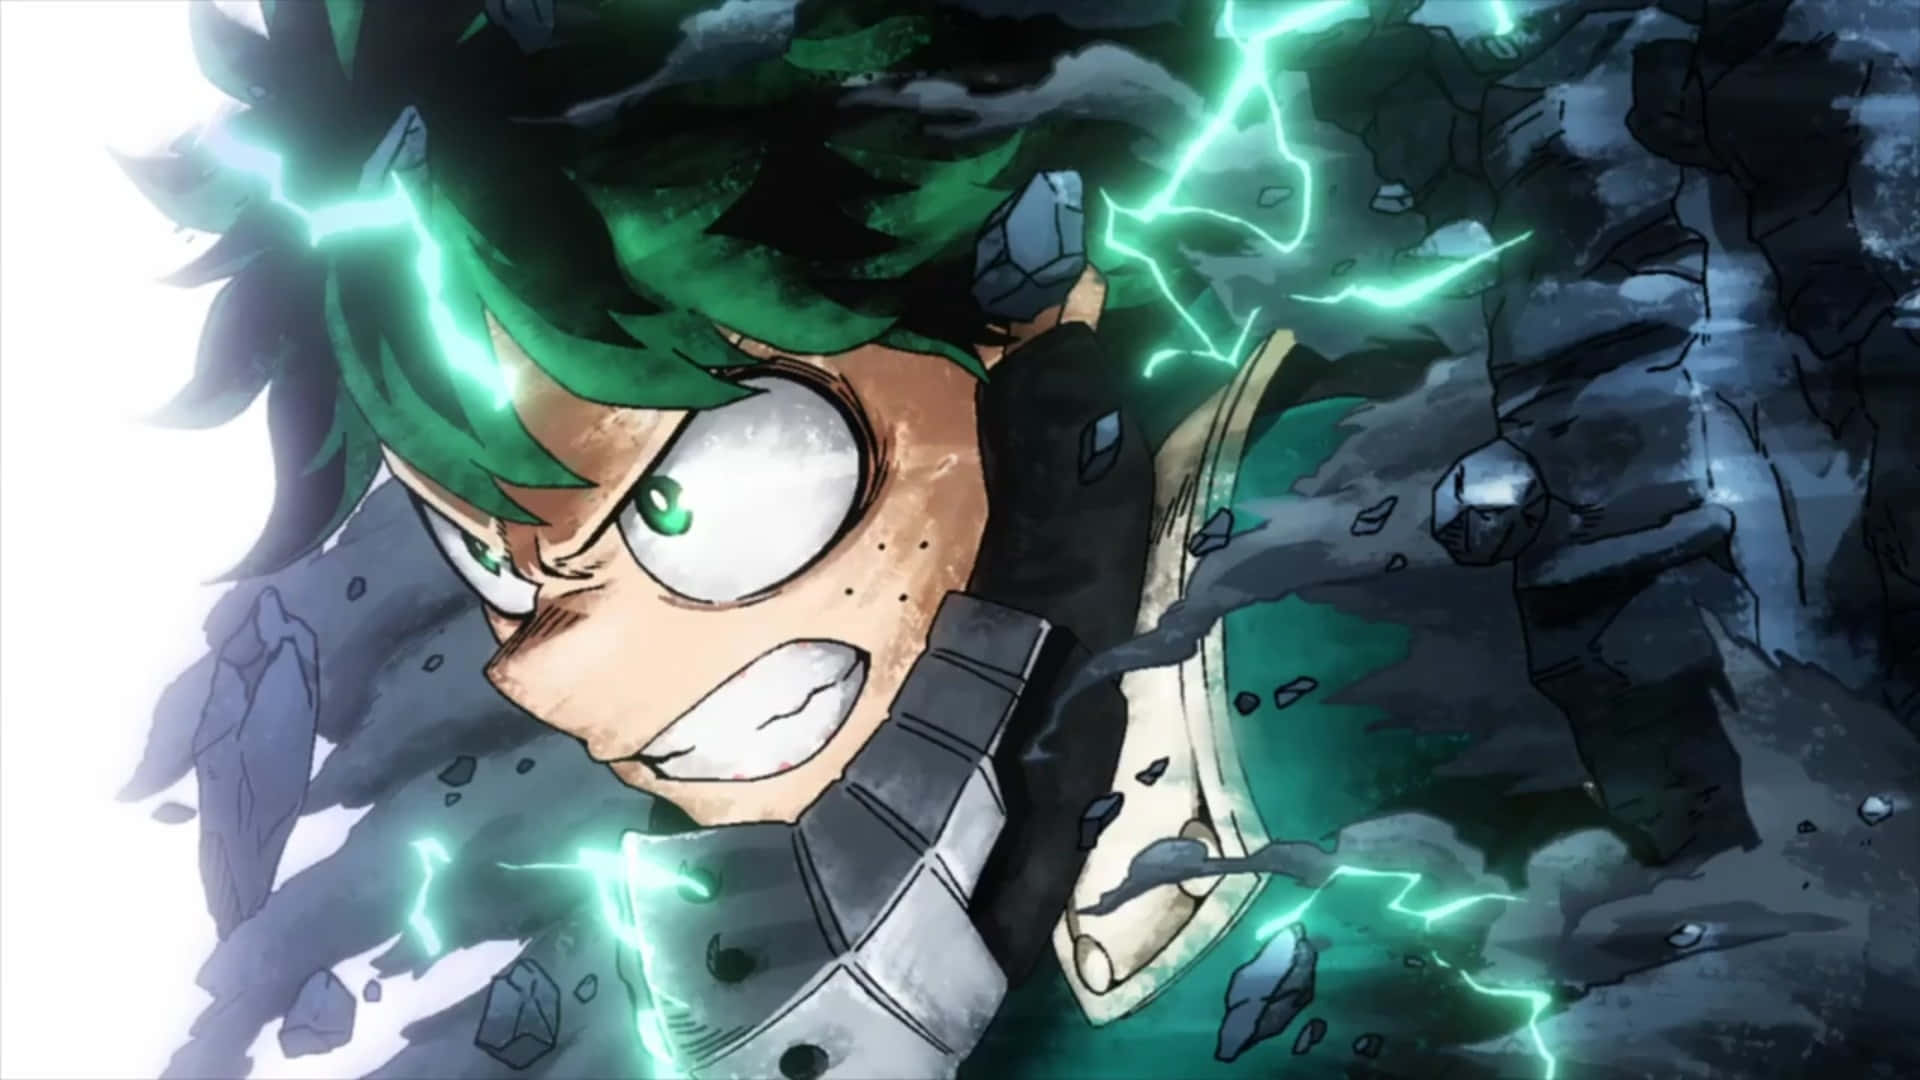 A Green Anime Character With Lightning Coming Out Of His Head